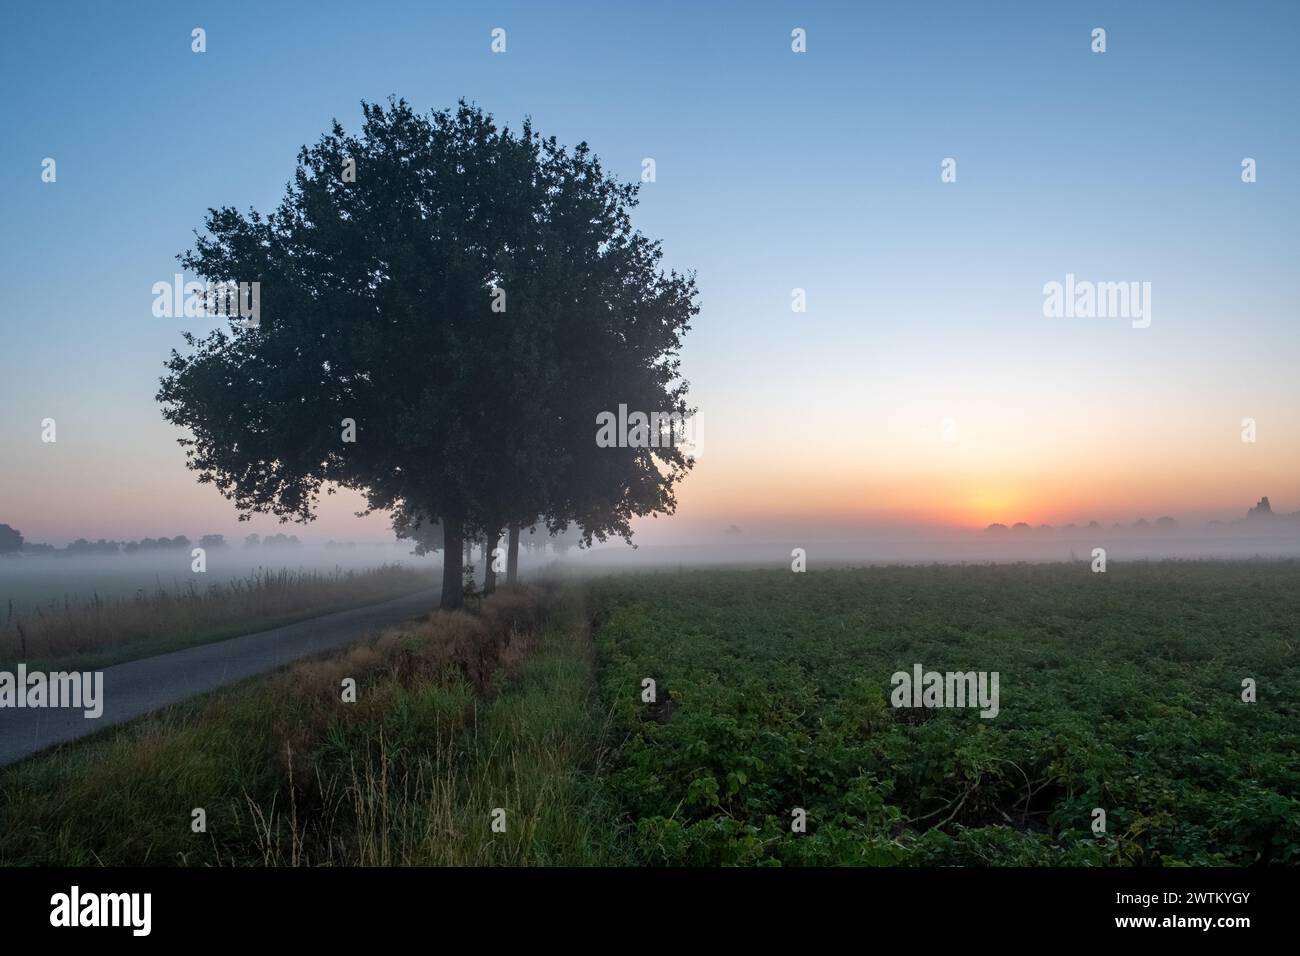 This image captures the serene atmosphere of a foggy sunrise on a country road. The silhouette of a large, leafy tree dominates the left side of the frame, standing as a sentinel over the mist-veiled landscape. The soft light of the rising sun seeps through the fog, casting a diffuse glow and creating a gradient of colors in the sky. The road itself leads the eye towards the misty horizon, inviting contemplation of the quiet and stillness of the early morning in the countryside. Foggy Sunrise on a Country Road with a Silhouetted Tree. High quality photo Stock Photo